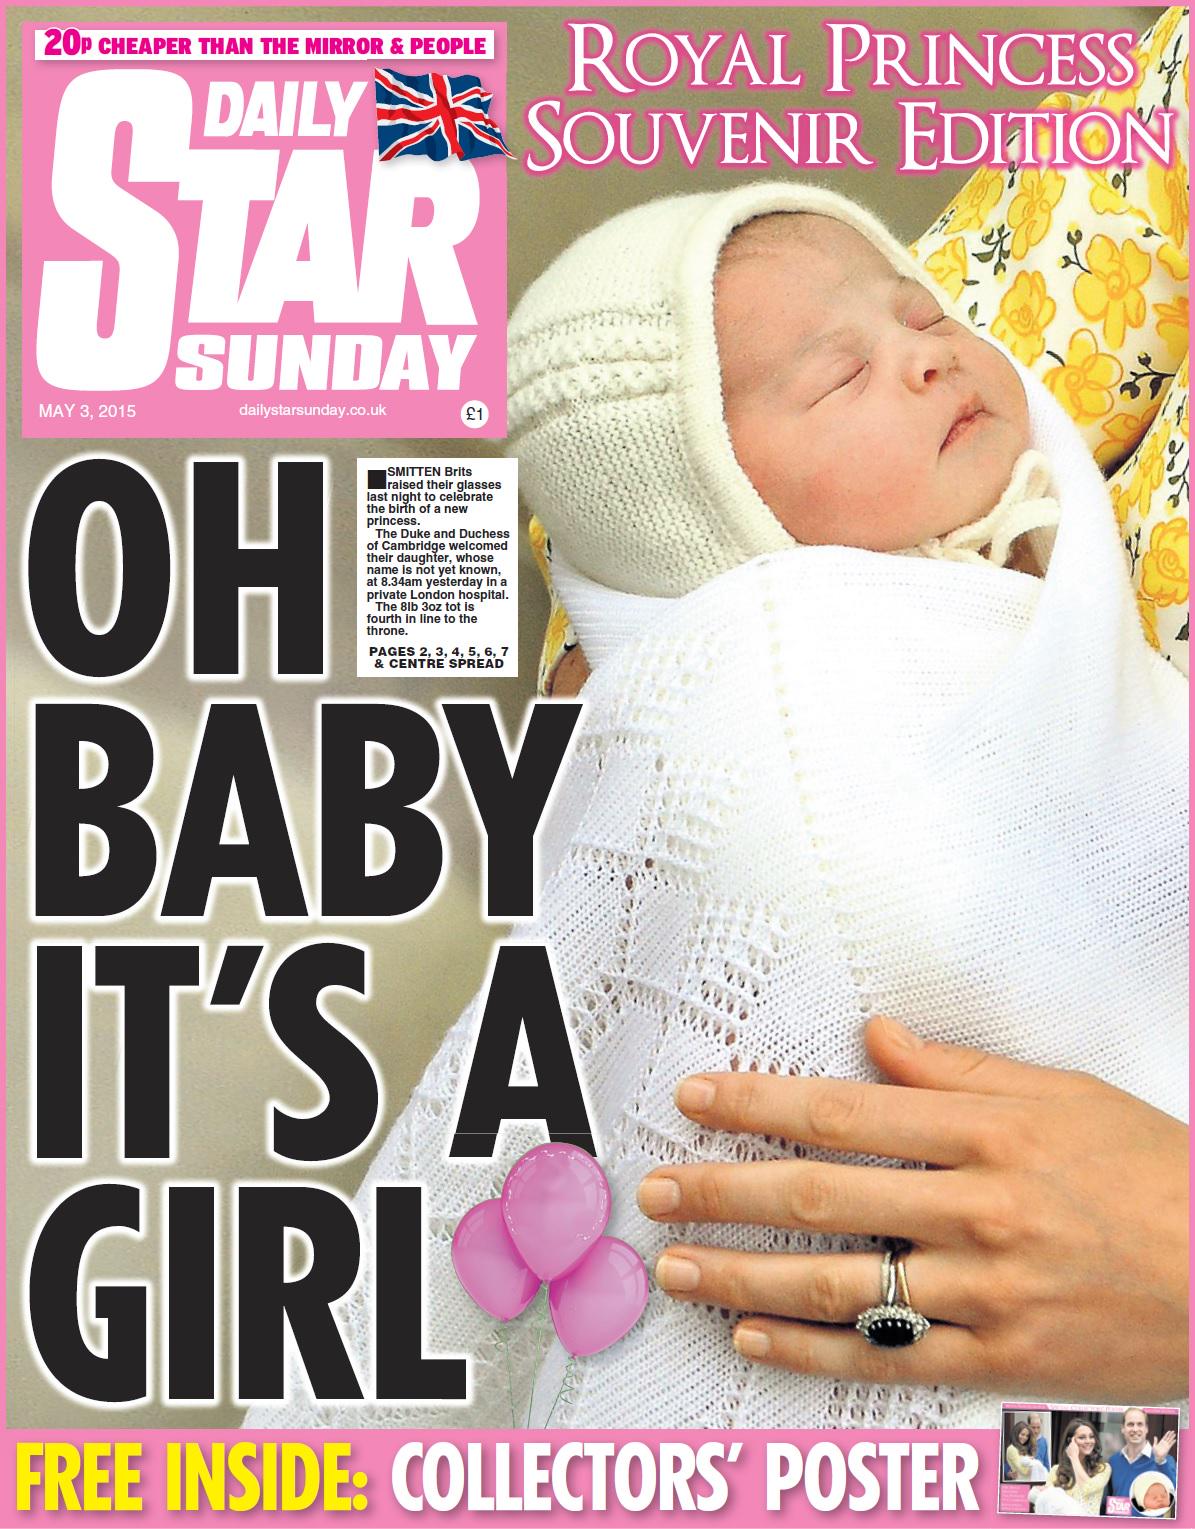 Royal baby: Duchess of Cambridge in early stages of labour - Page 2 CEBrLIWUIAEP3XO